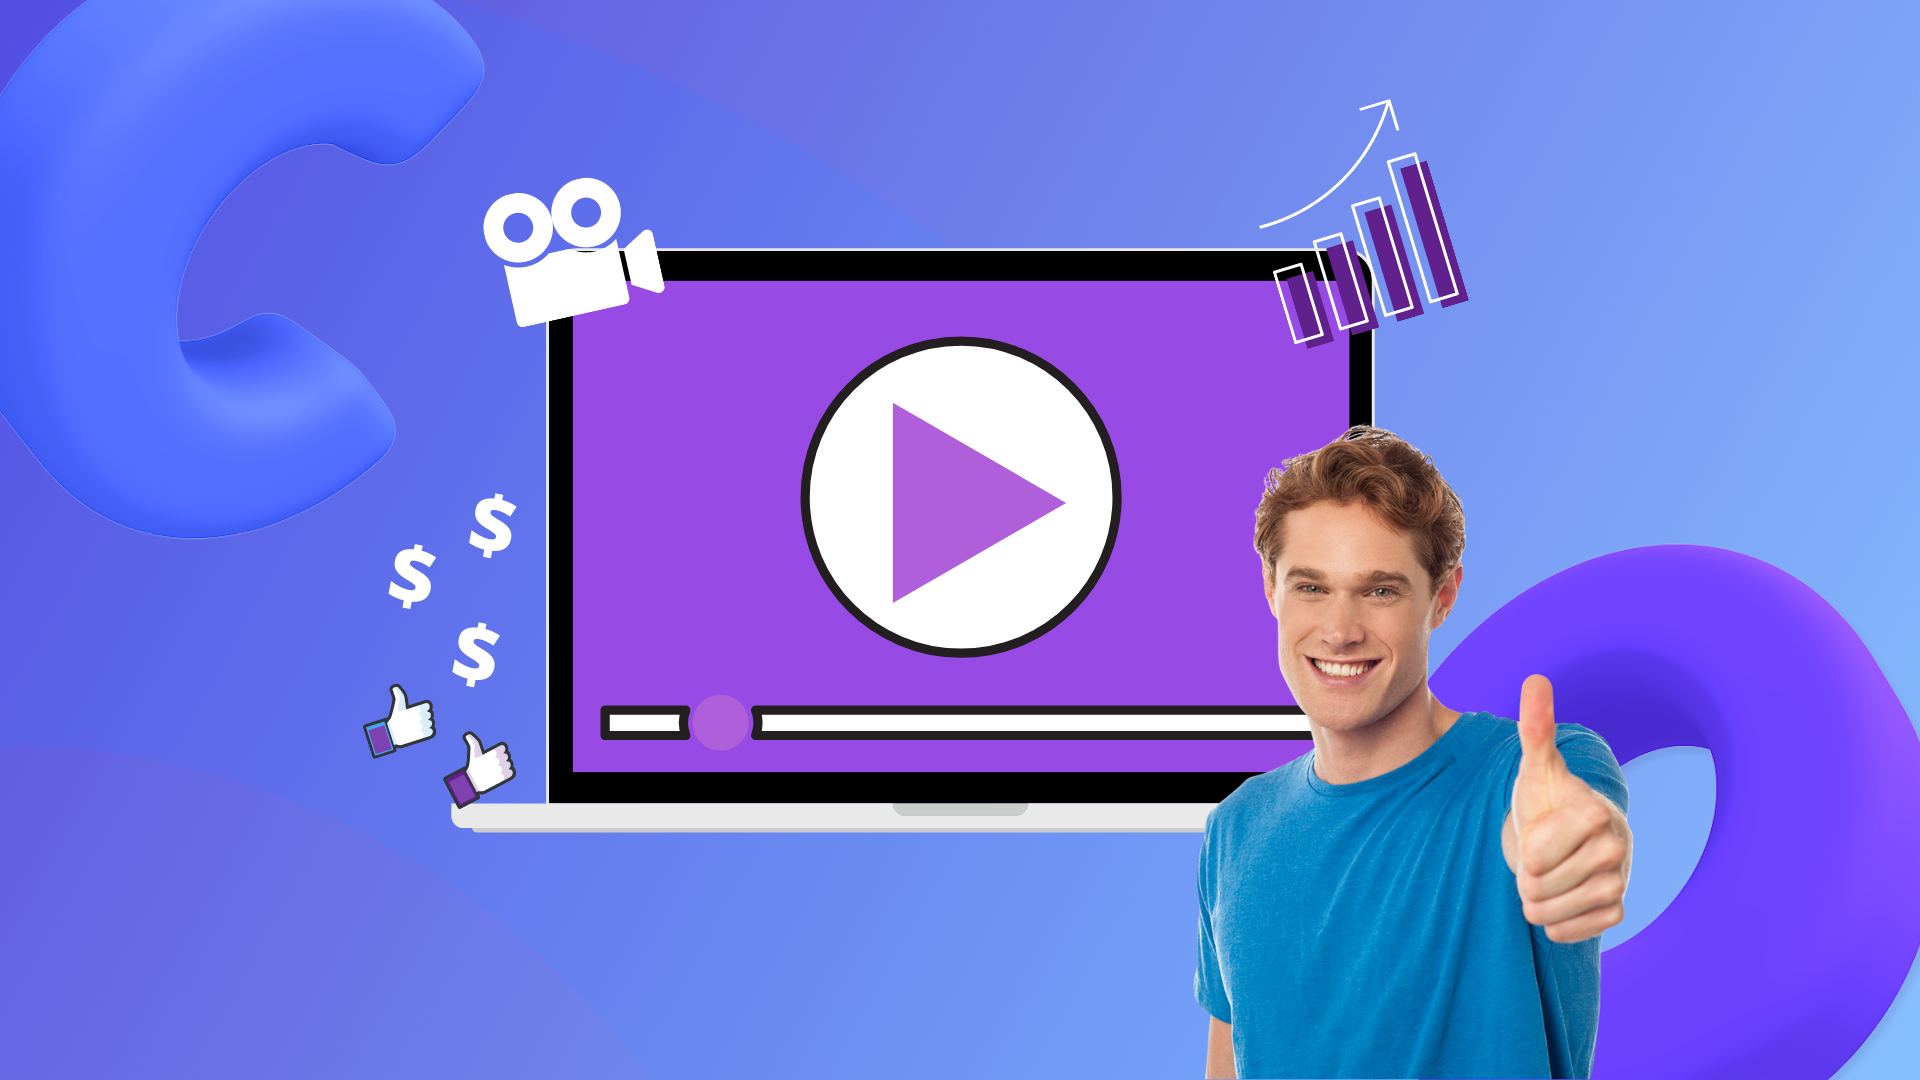 Our guide to creating a video marketing strategy